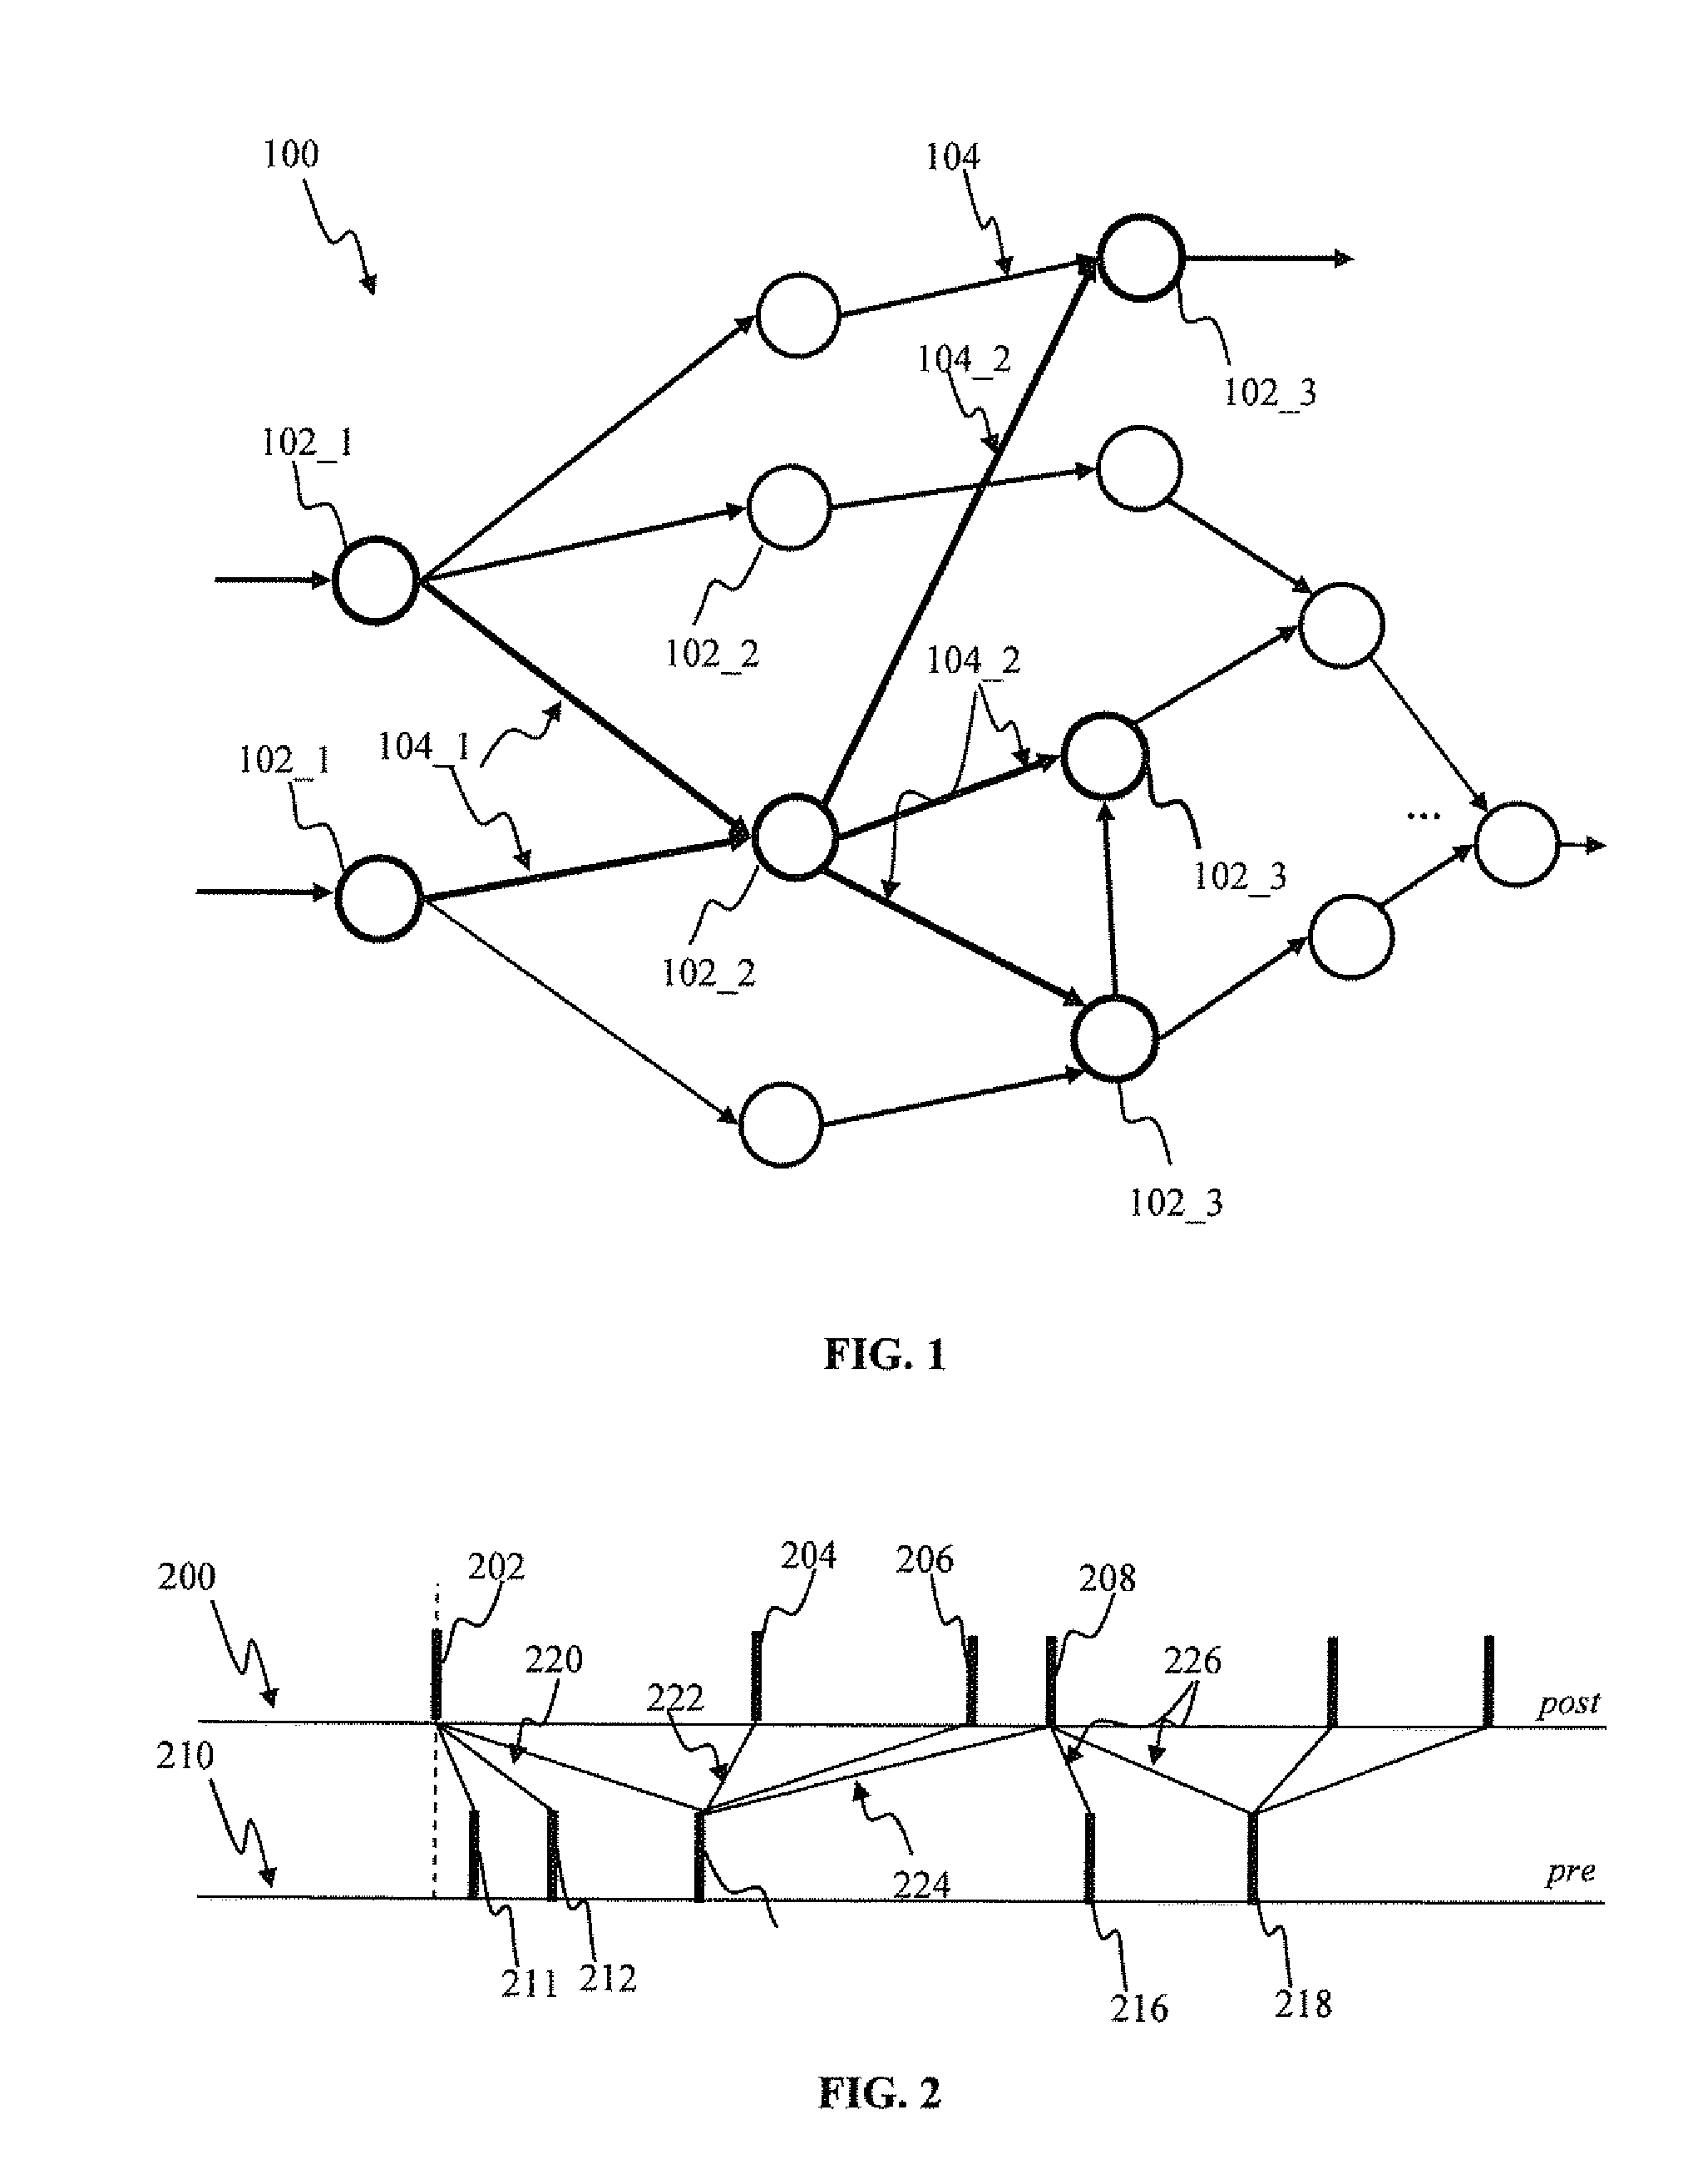 Neural network learning and collaboration apparatus and methods